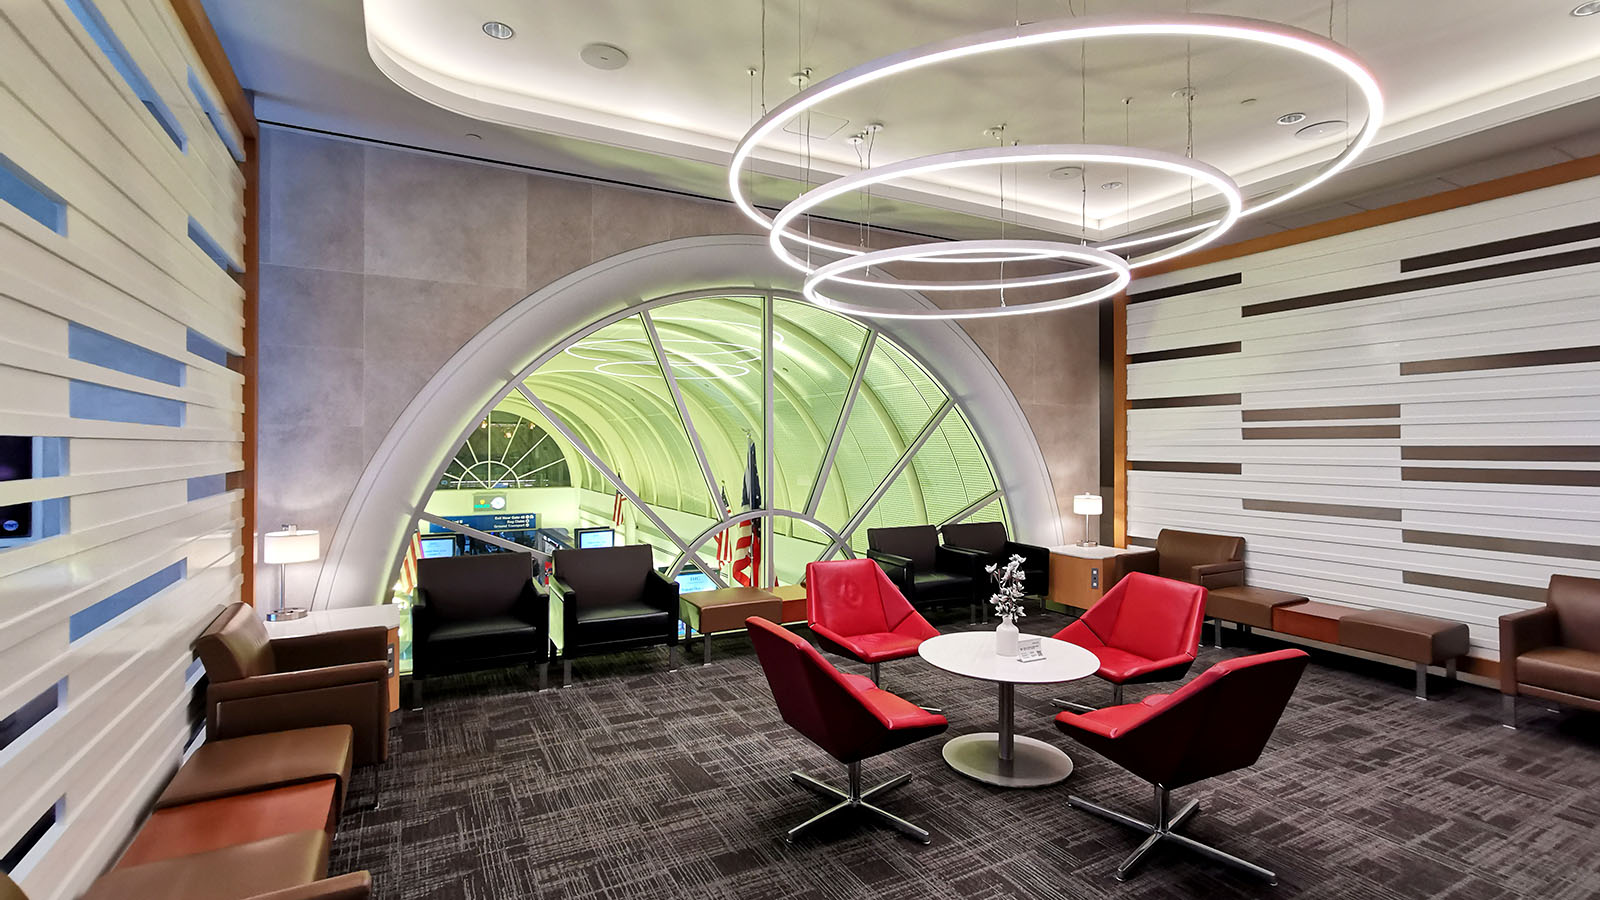 Seating in the American Airlines Flagship Lounge, Los Angeles